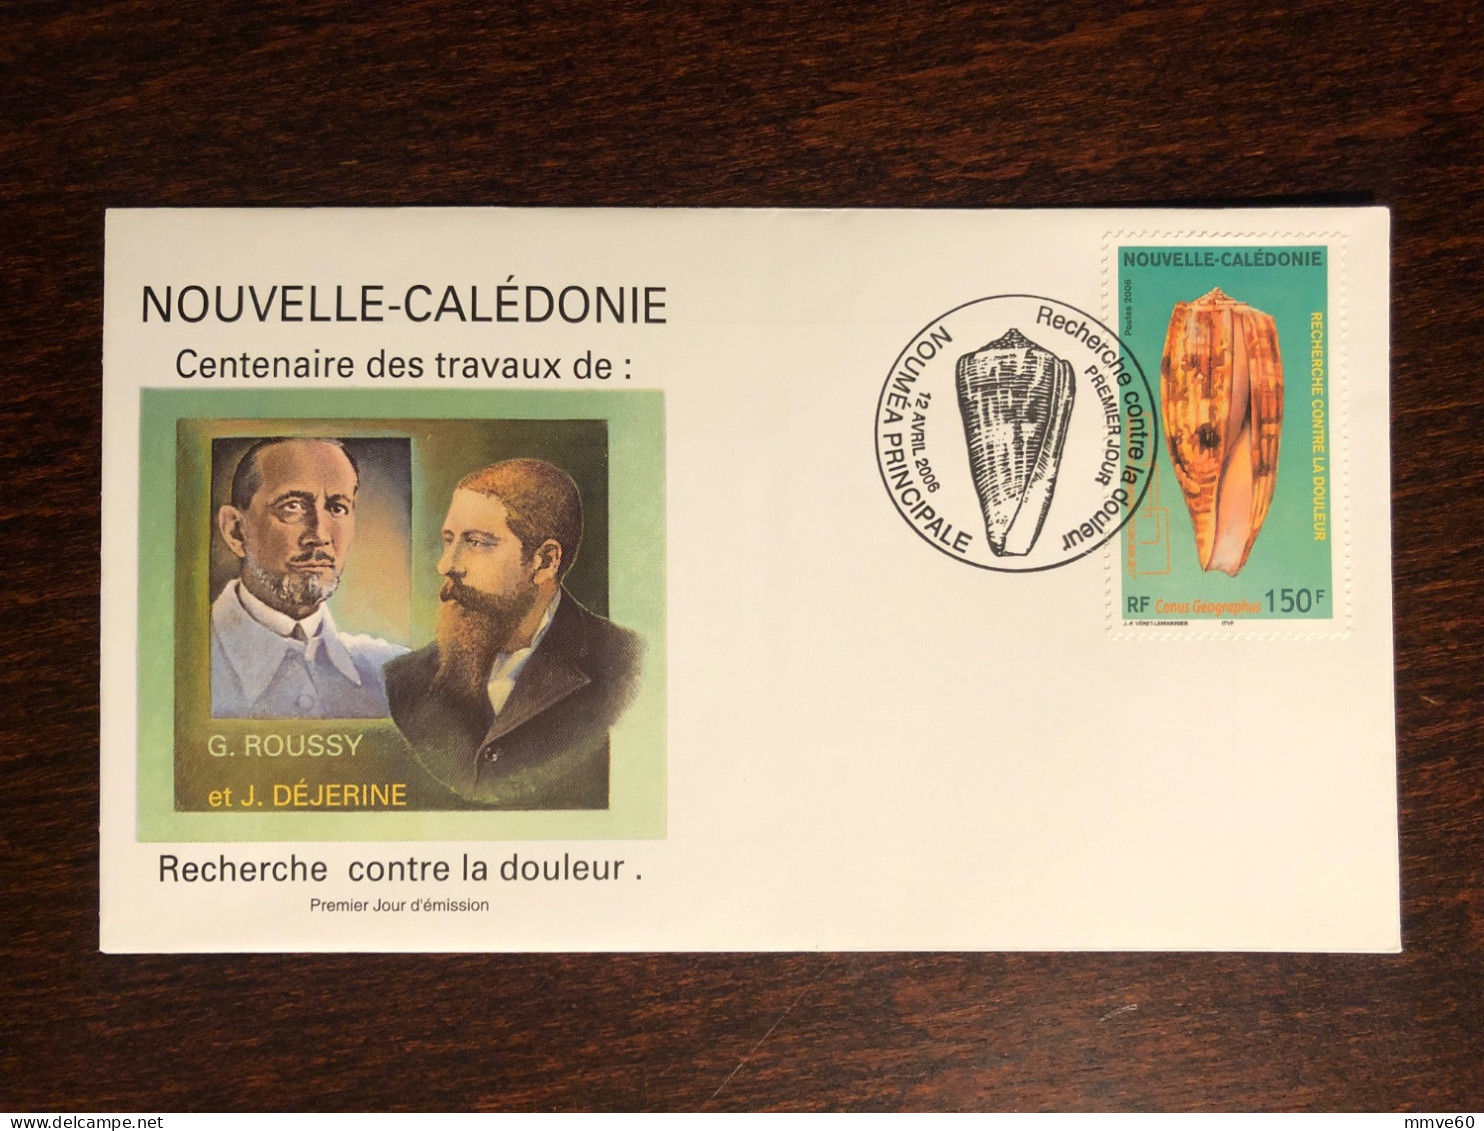 NEW CALEDONIA NOUVELLE CALEDONIE FDC COVER 2006 YEAR PAIN RESEARCH NEUROLOGY HEALTH MEDICINE - Briefe U. Dokumente